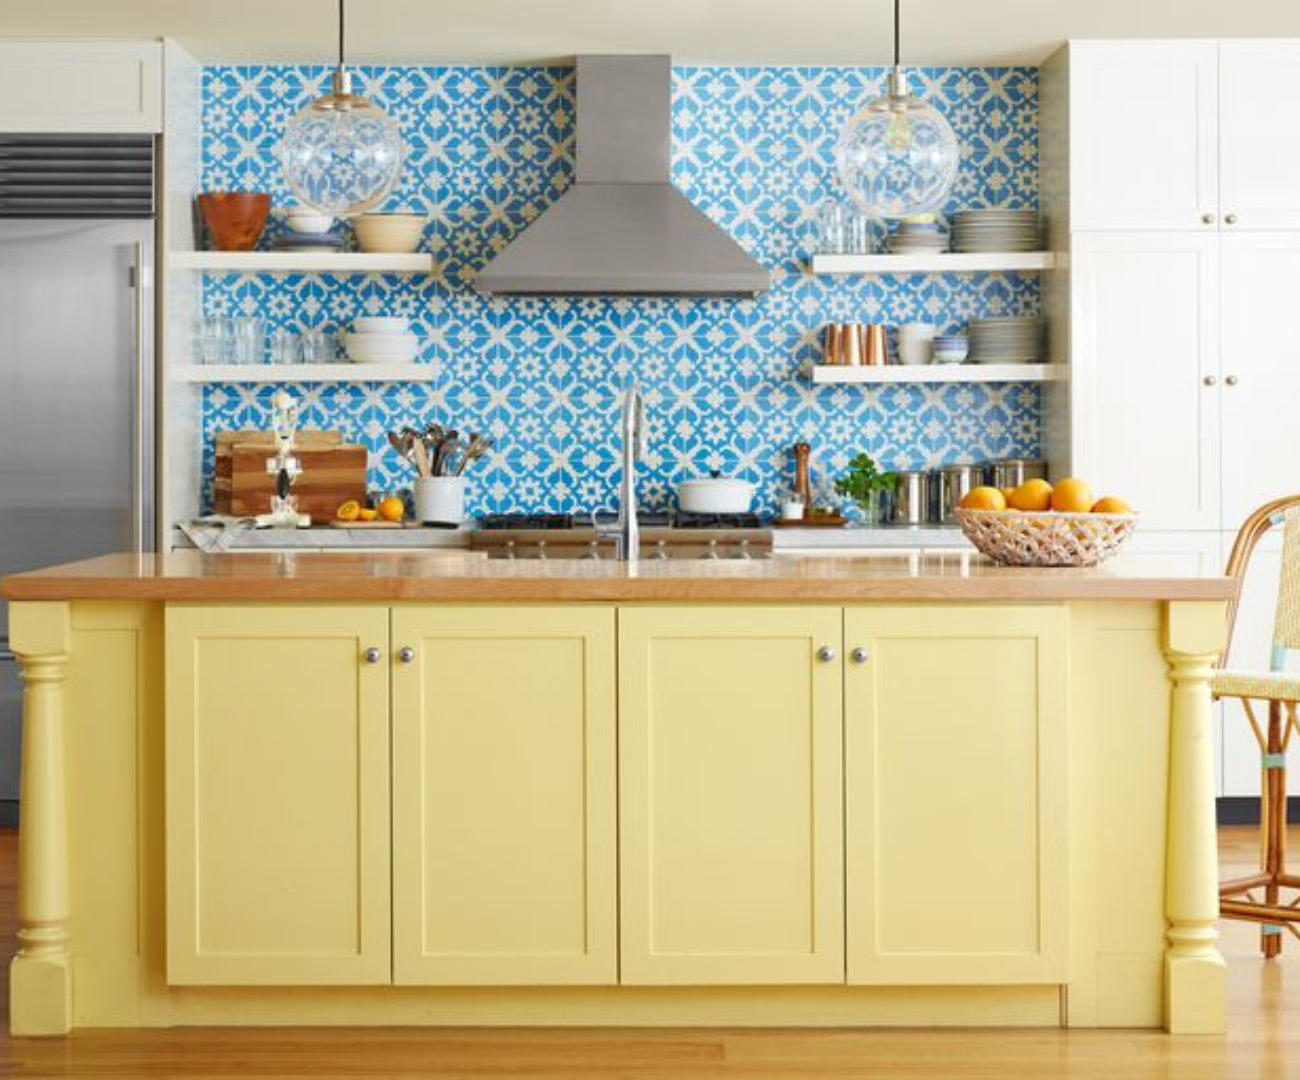 An image of a colourful kitchen